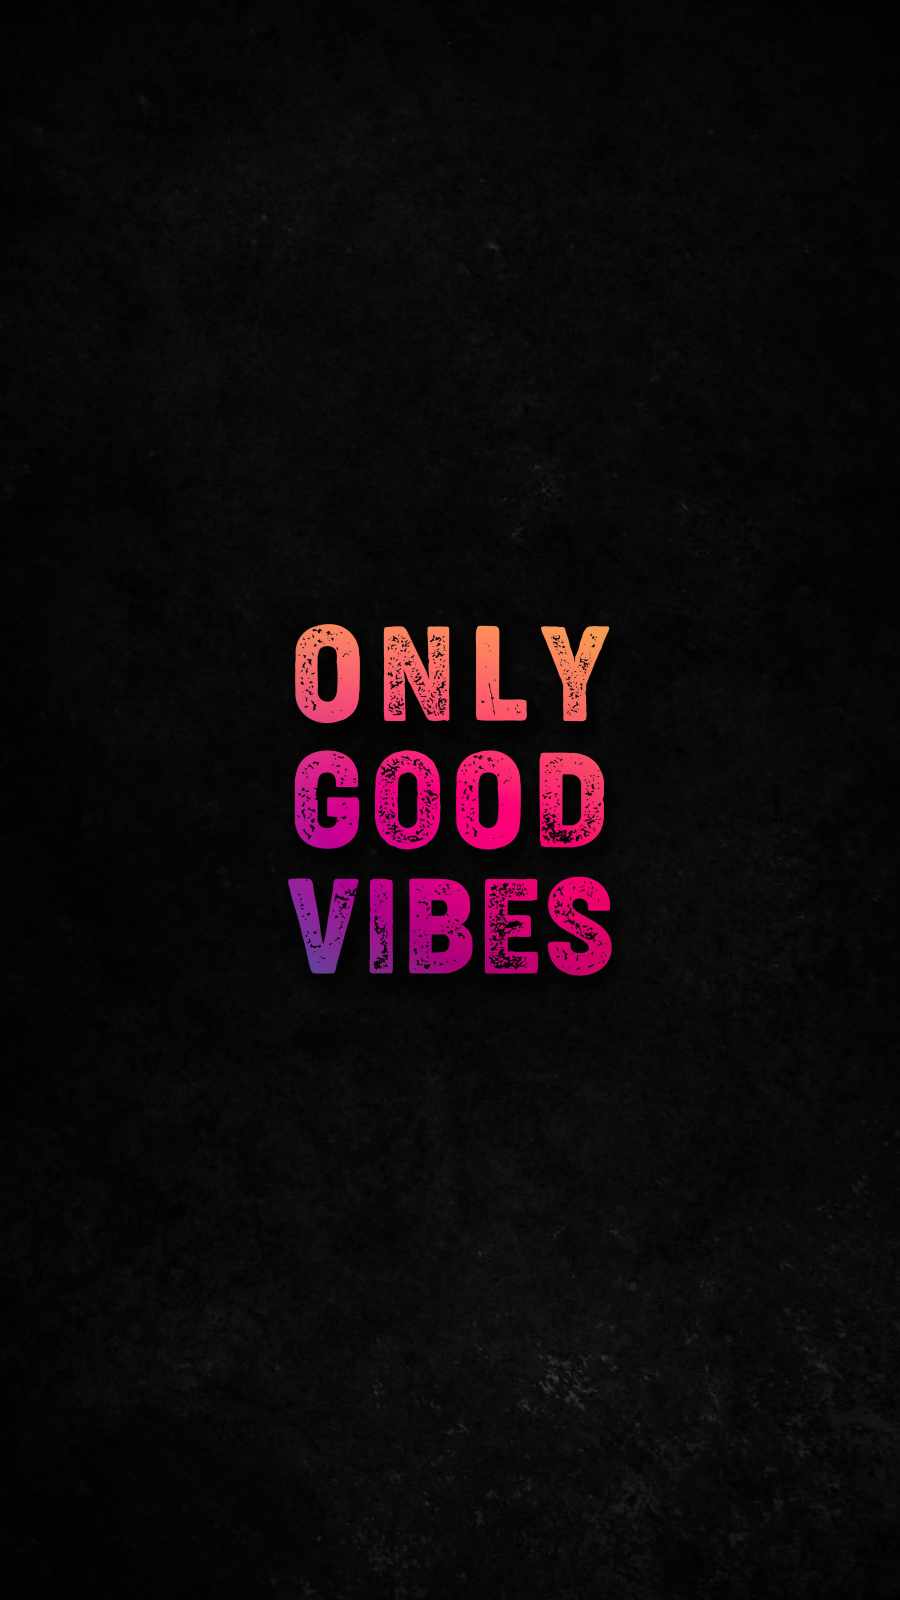 Good Vibes Only Wallpaper by FadedGlory20 on DeviantArt